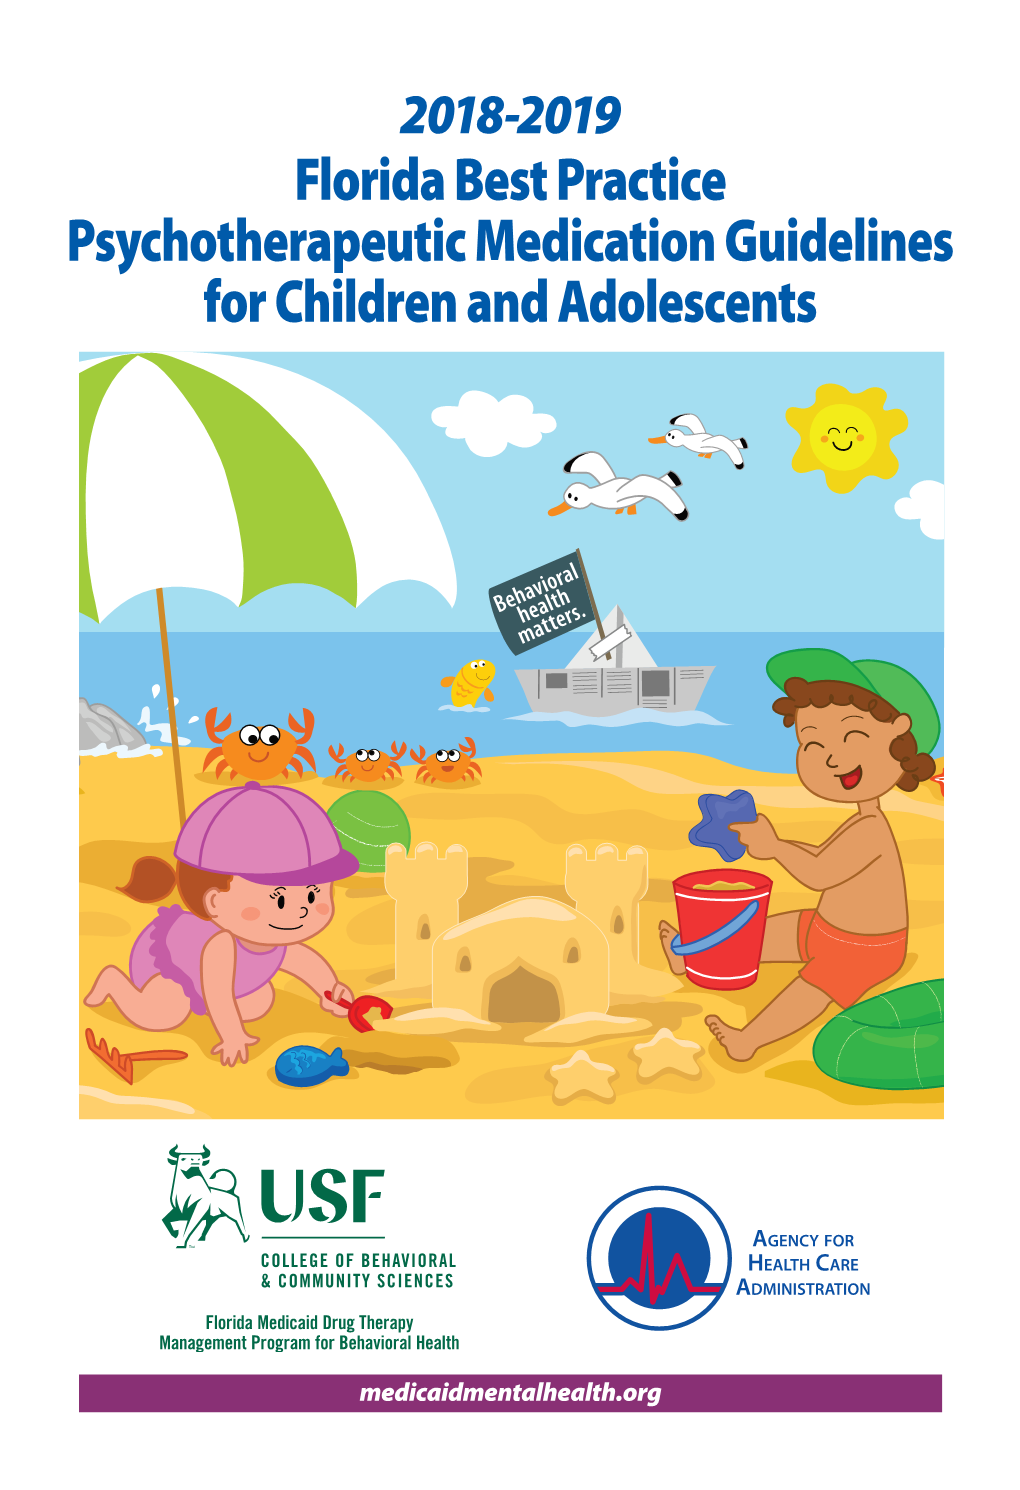 2018-2019 Florida Best Practice Psychotherapeutic Medication Guidelines for Children and Adolescents